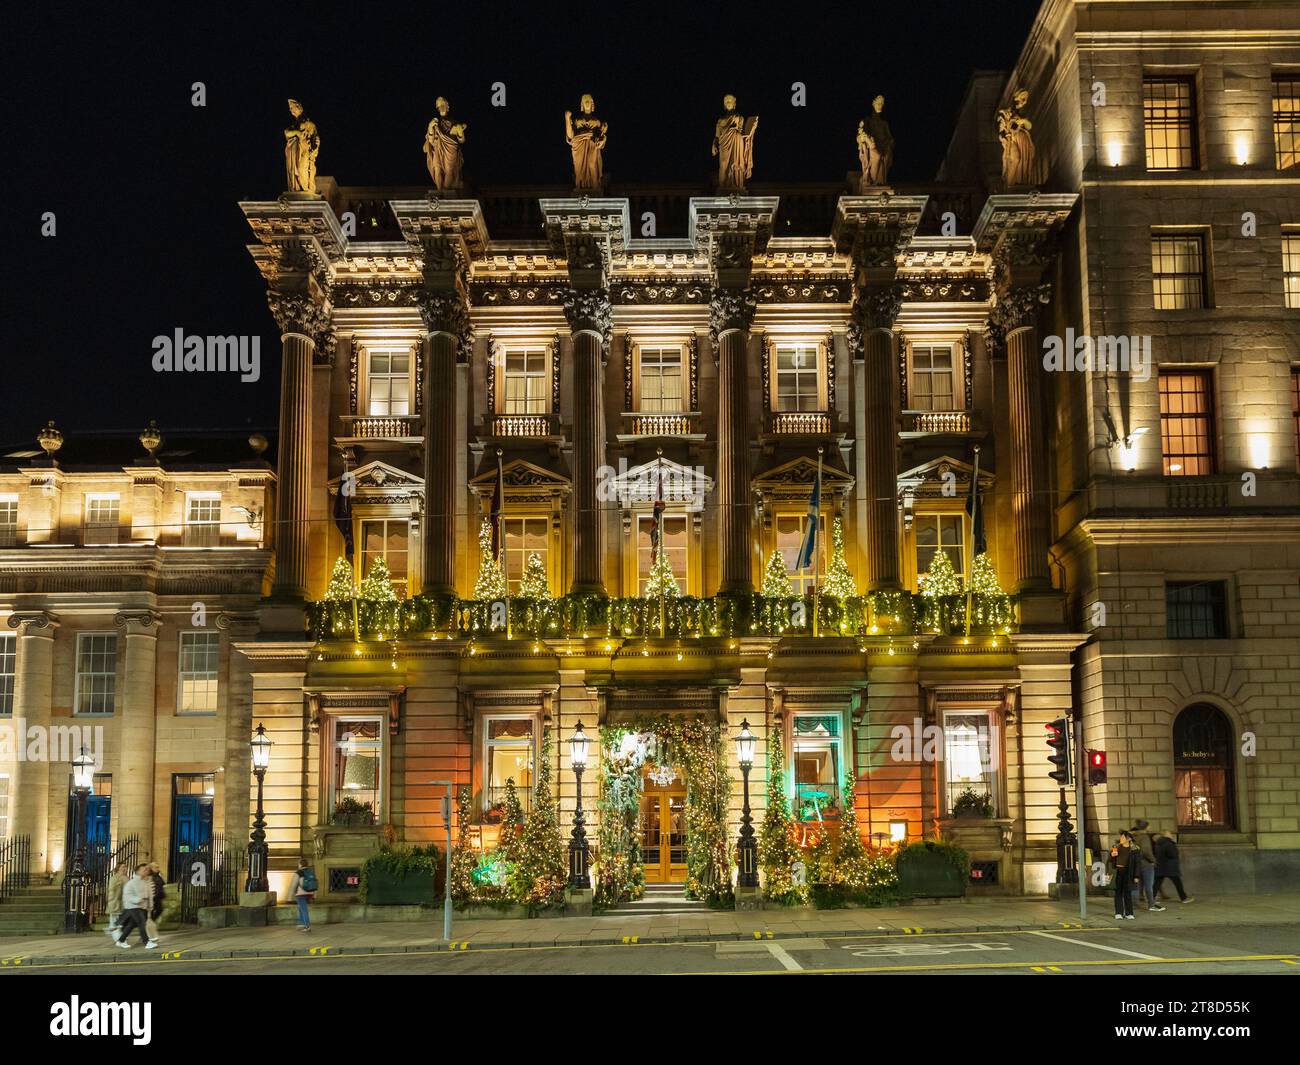 Exterior view at night of the Gleneagles Townhouse private Club, hotel and restaurant in St Andrew Square, Edinburgh, Scotland Stock Photo